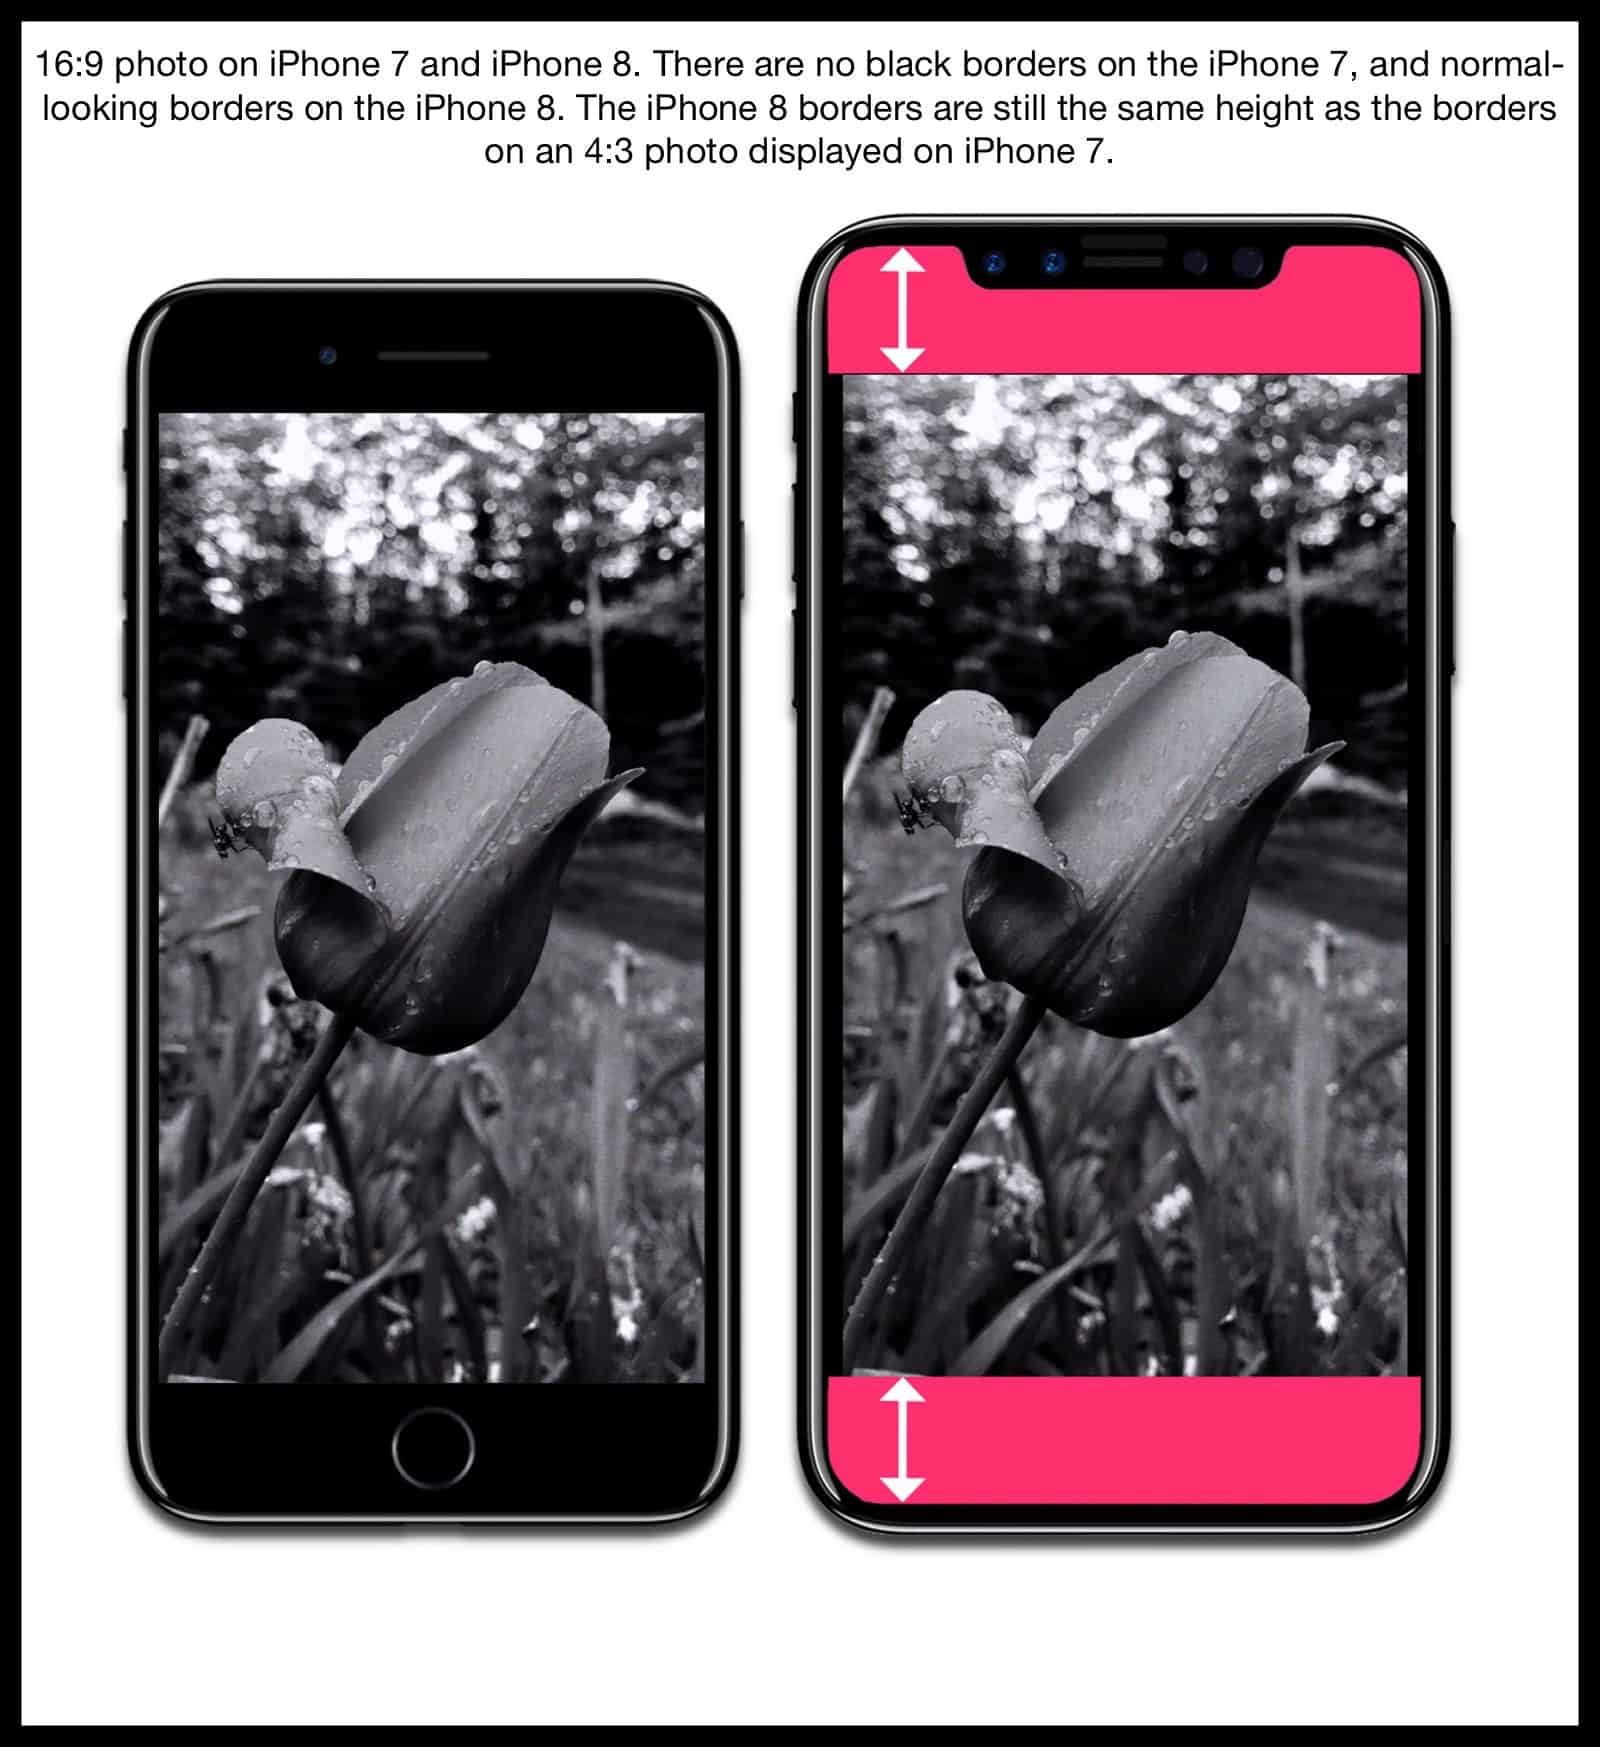 A Bezel Less Iphone 8 Will Change How Photos Look Page 2 Of 3 The Mac Observer